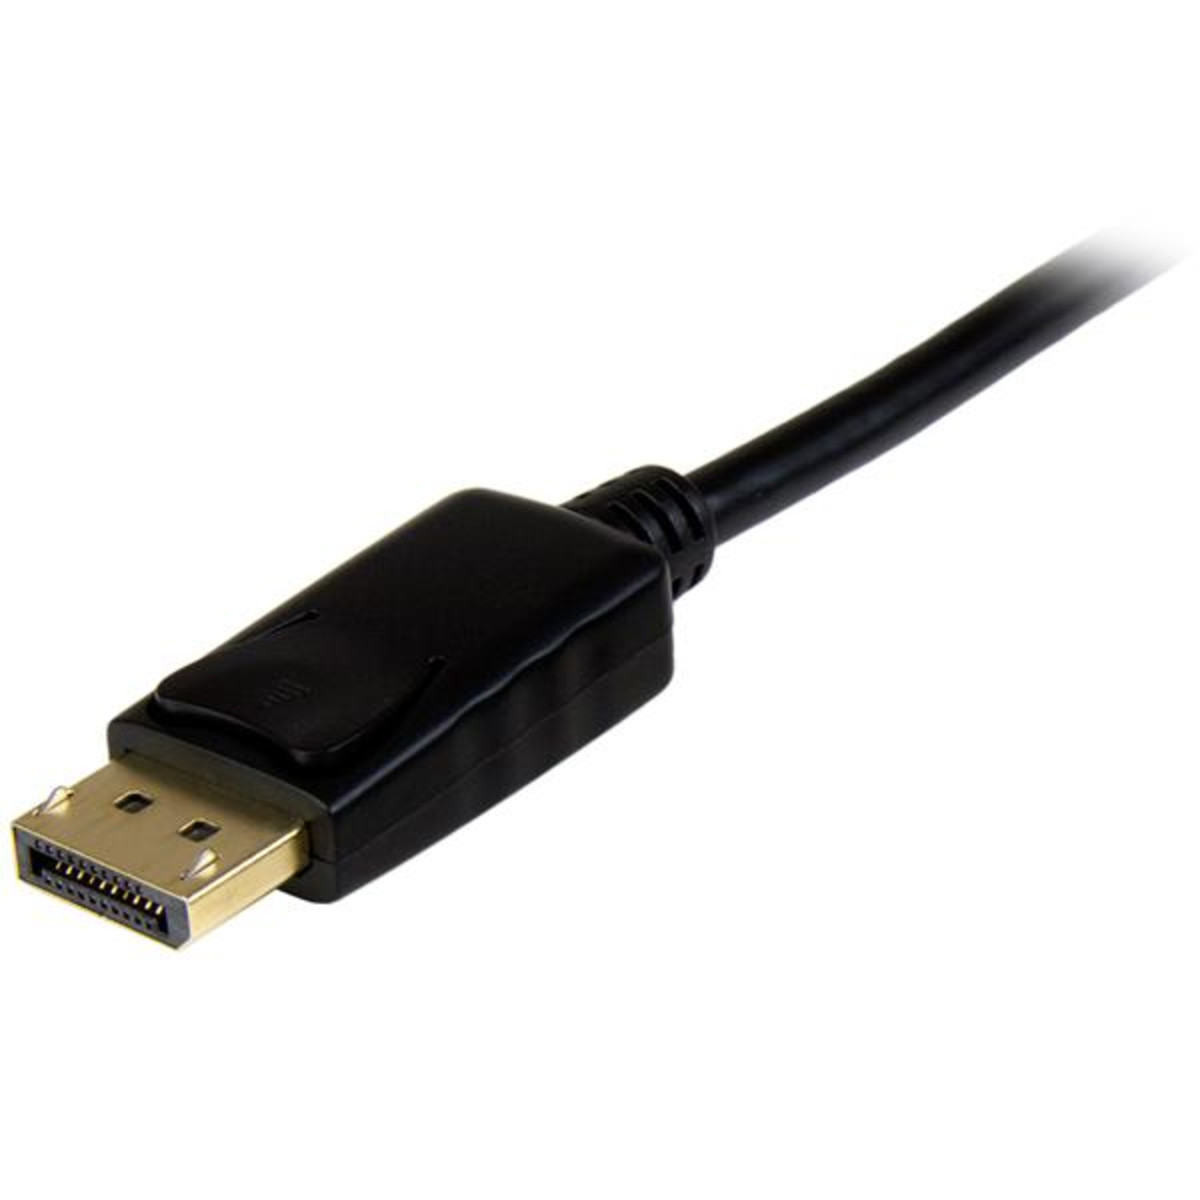 5m DisplayPort to HDMI Converter Cable